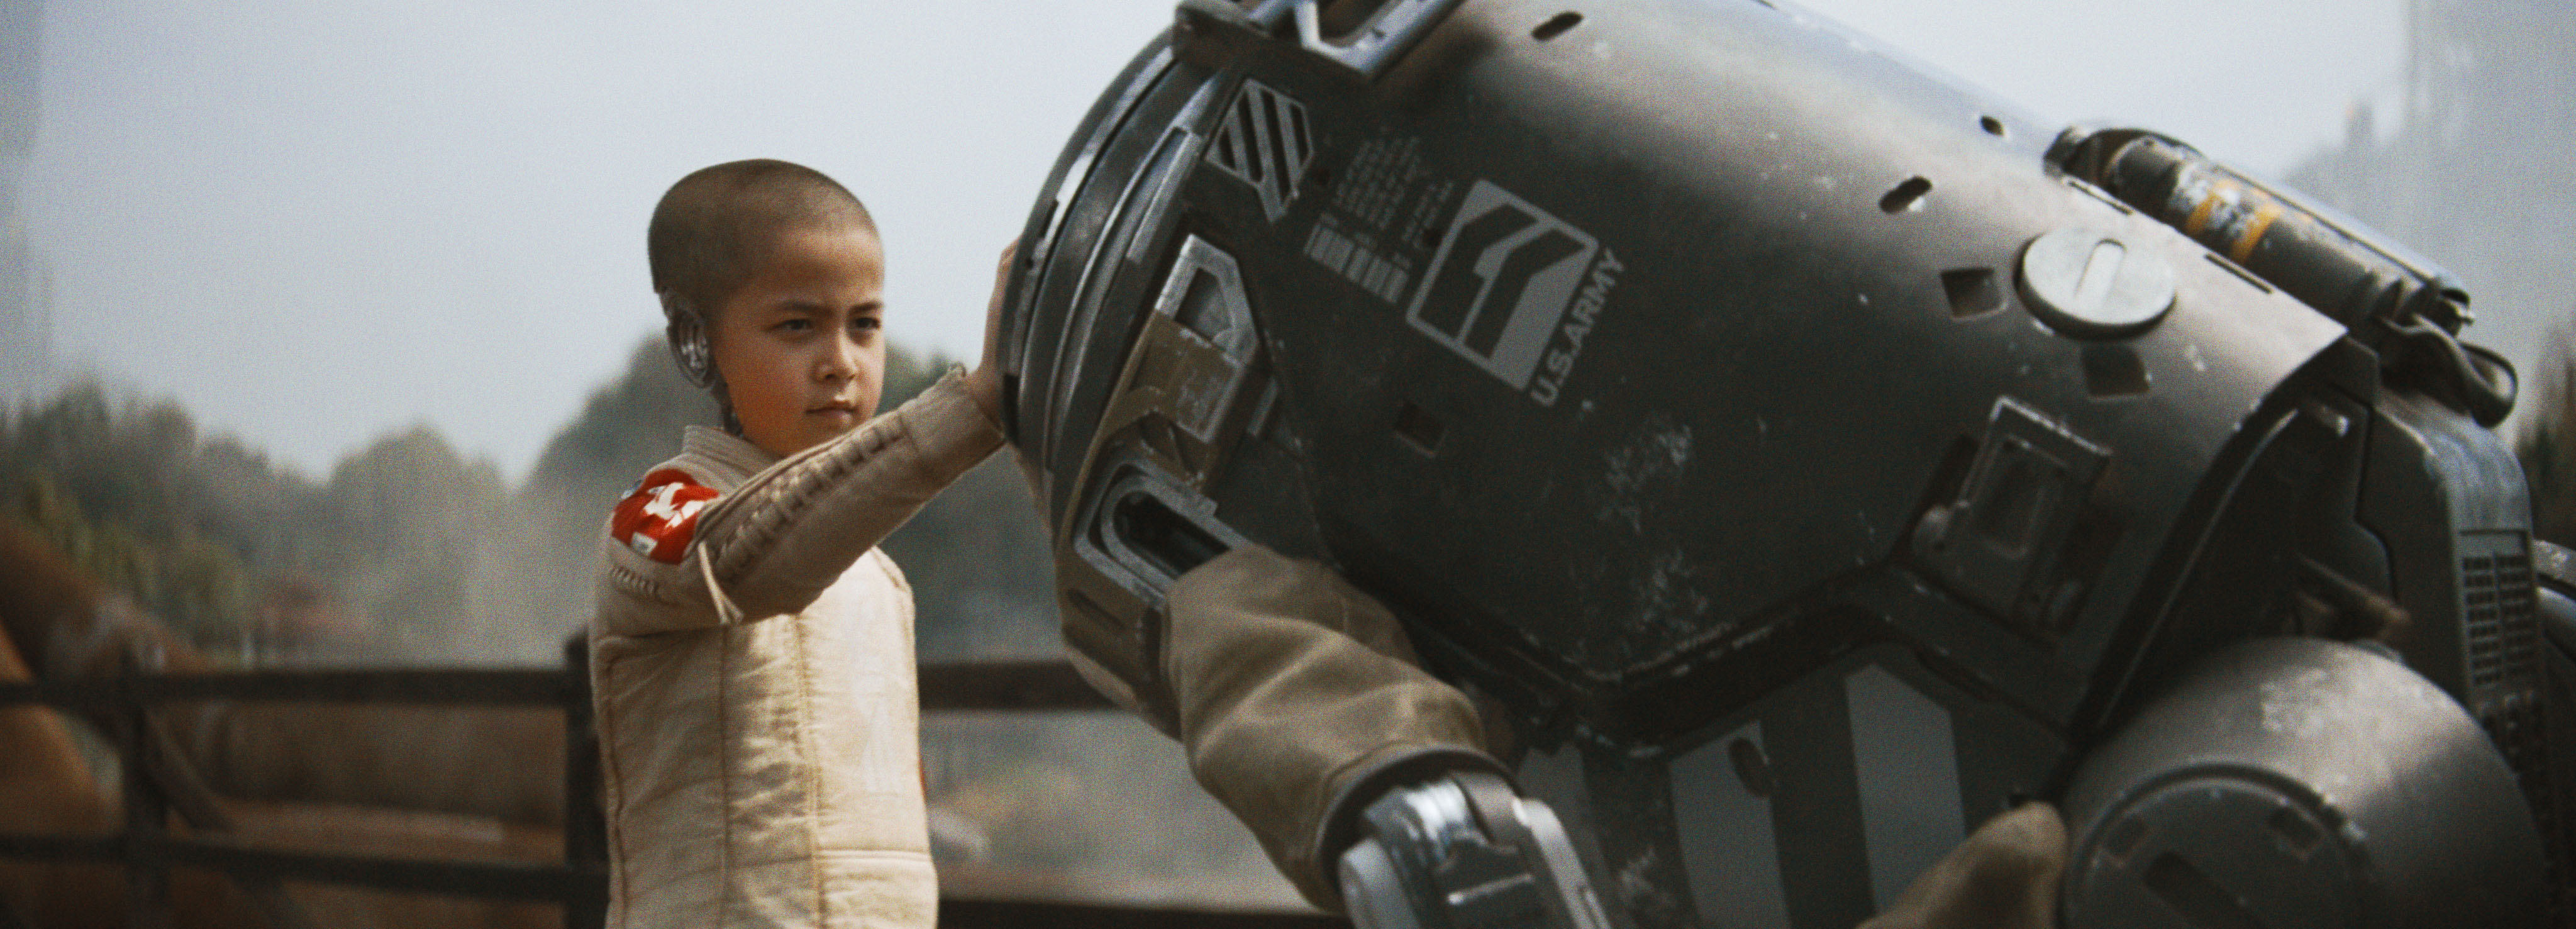 A young robot girl with a shaved head places her hand on a trash-can-like robot bowing to her in The Creator